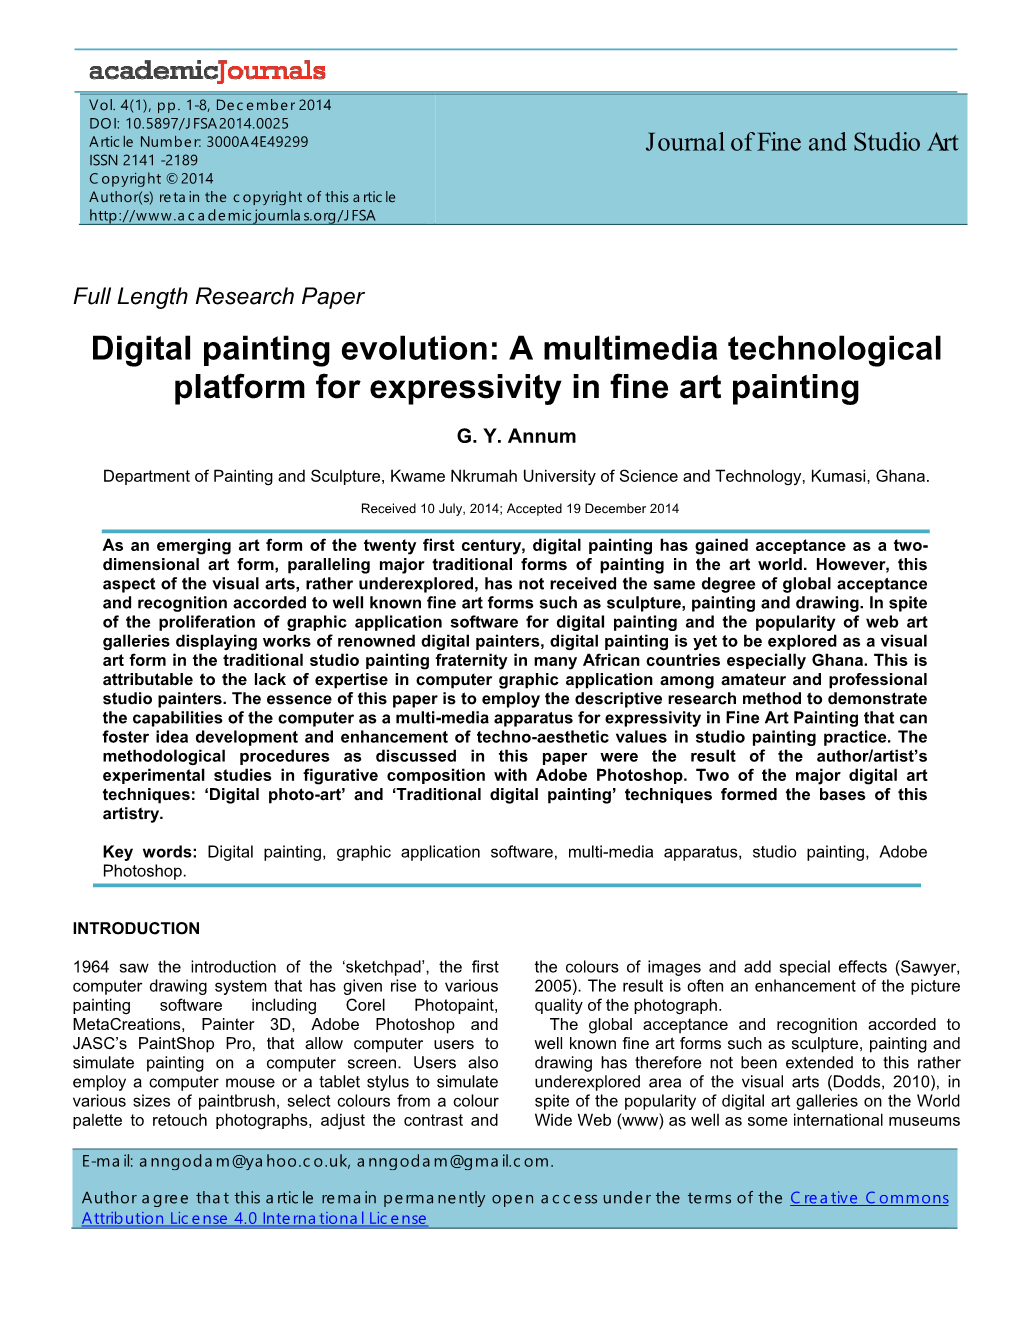 Digital Painting Evolution: a Multimedia Technological Platform for Expressivity in Fine Art Painting